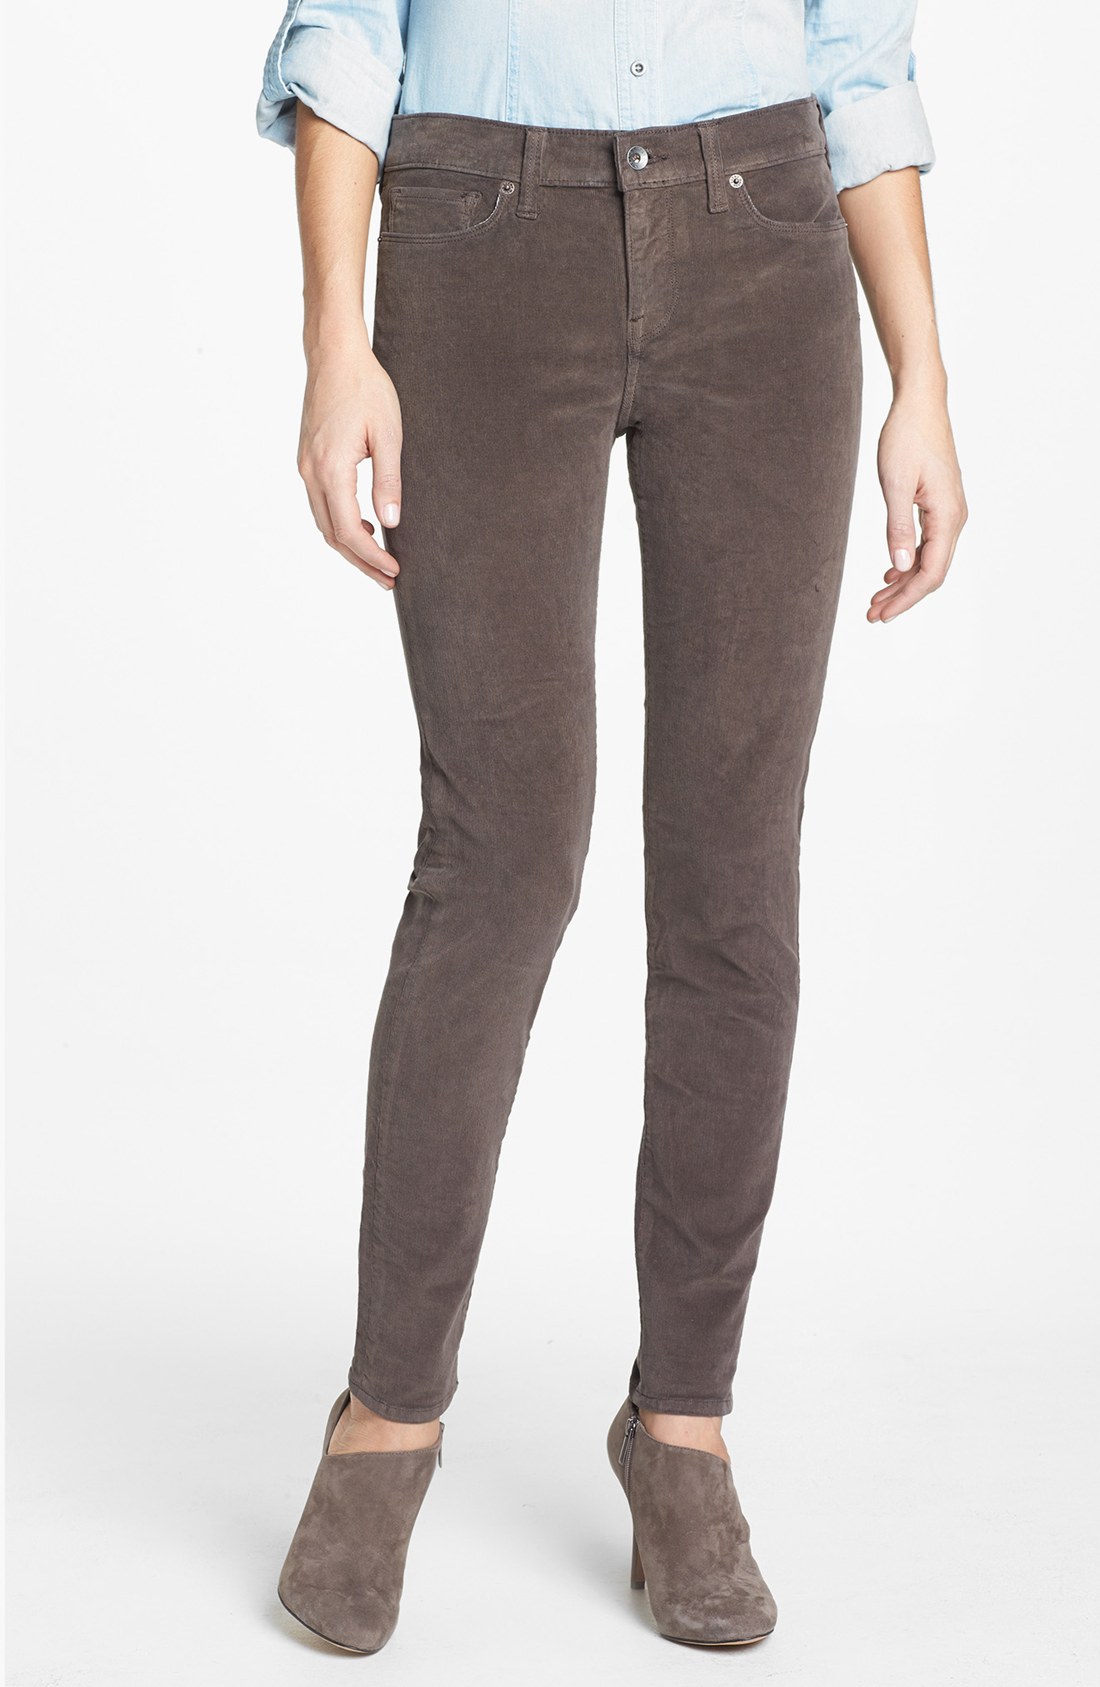 Lucky Brand Sofia Skinny Corduroy Pants in Brown (Antique Wood) | Lyst